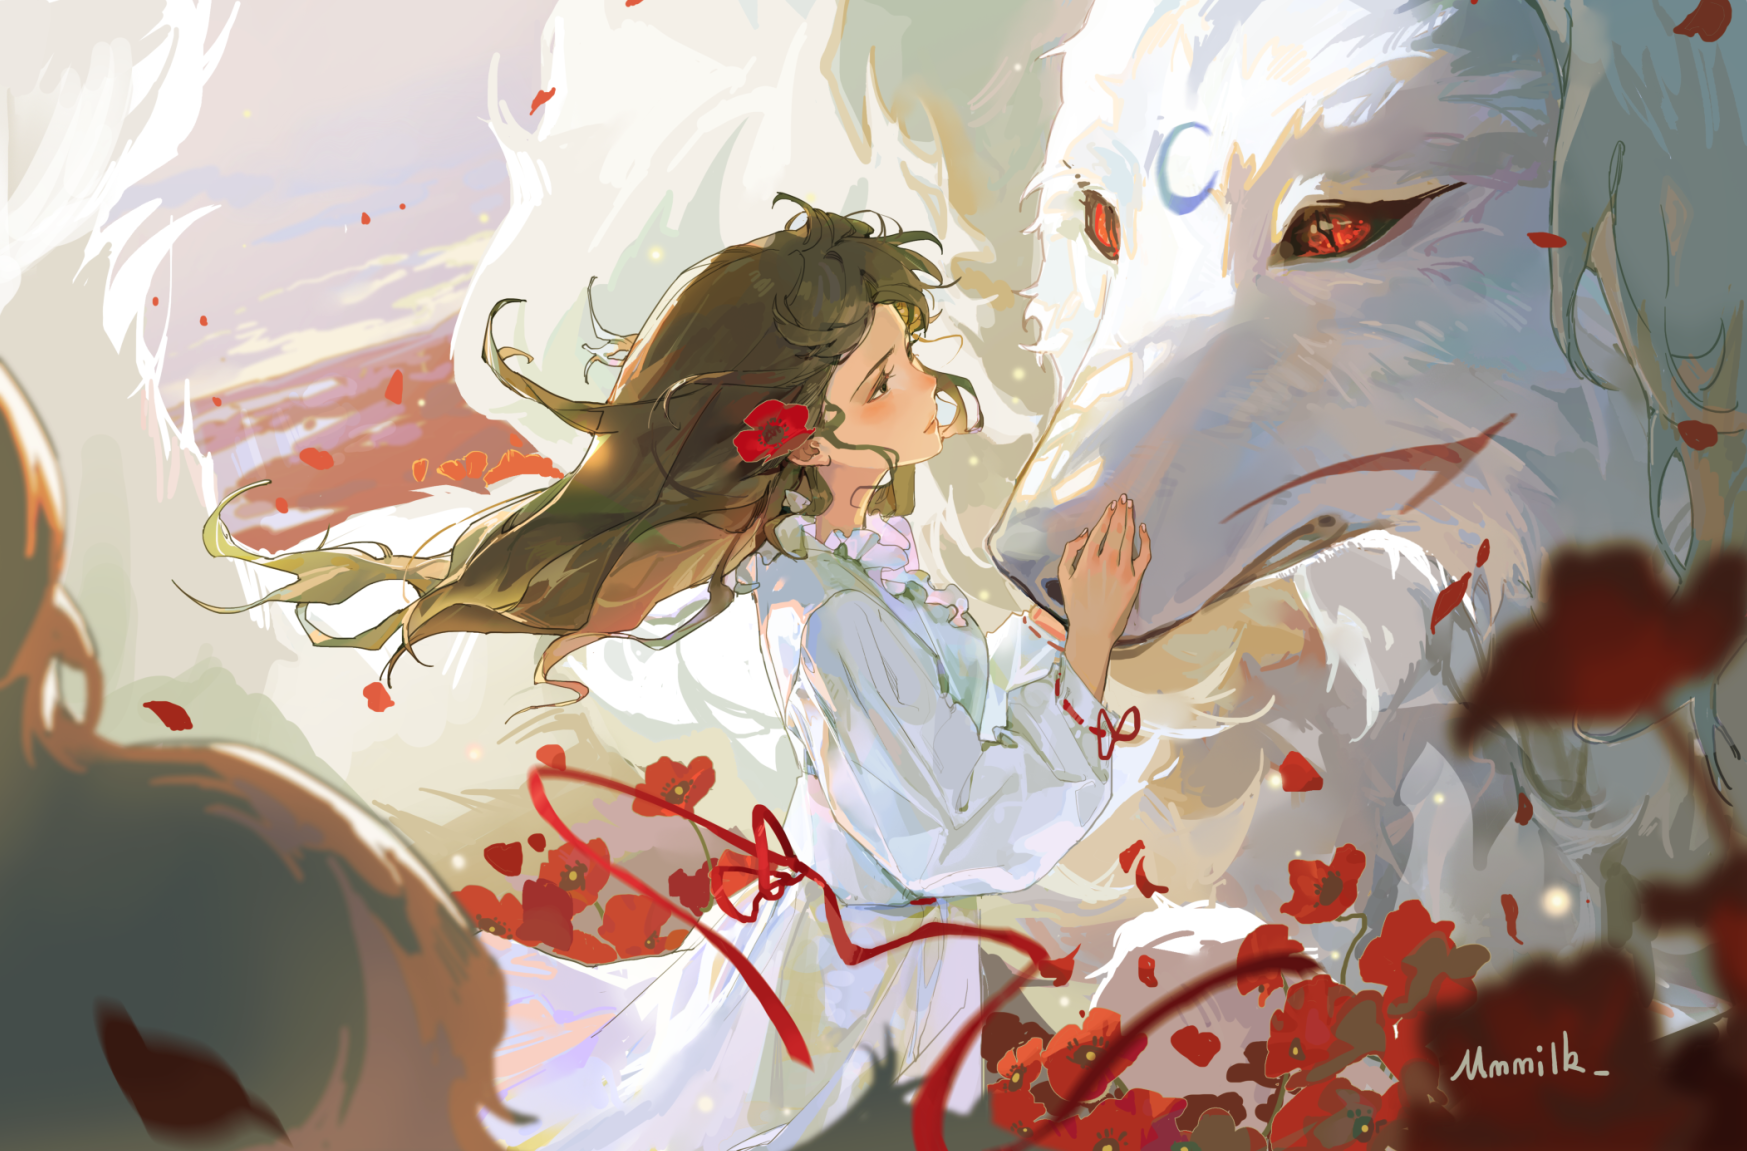 Anime Anime Girls Wolf Brunette Long Hair Red Eyes Flowers Petals Ribbons Poppies Sky Clouds Flower  1747x1151